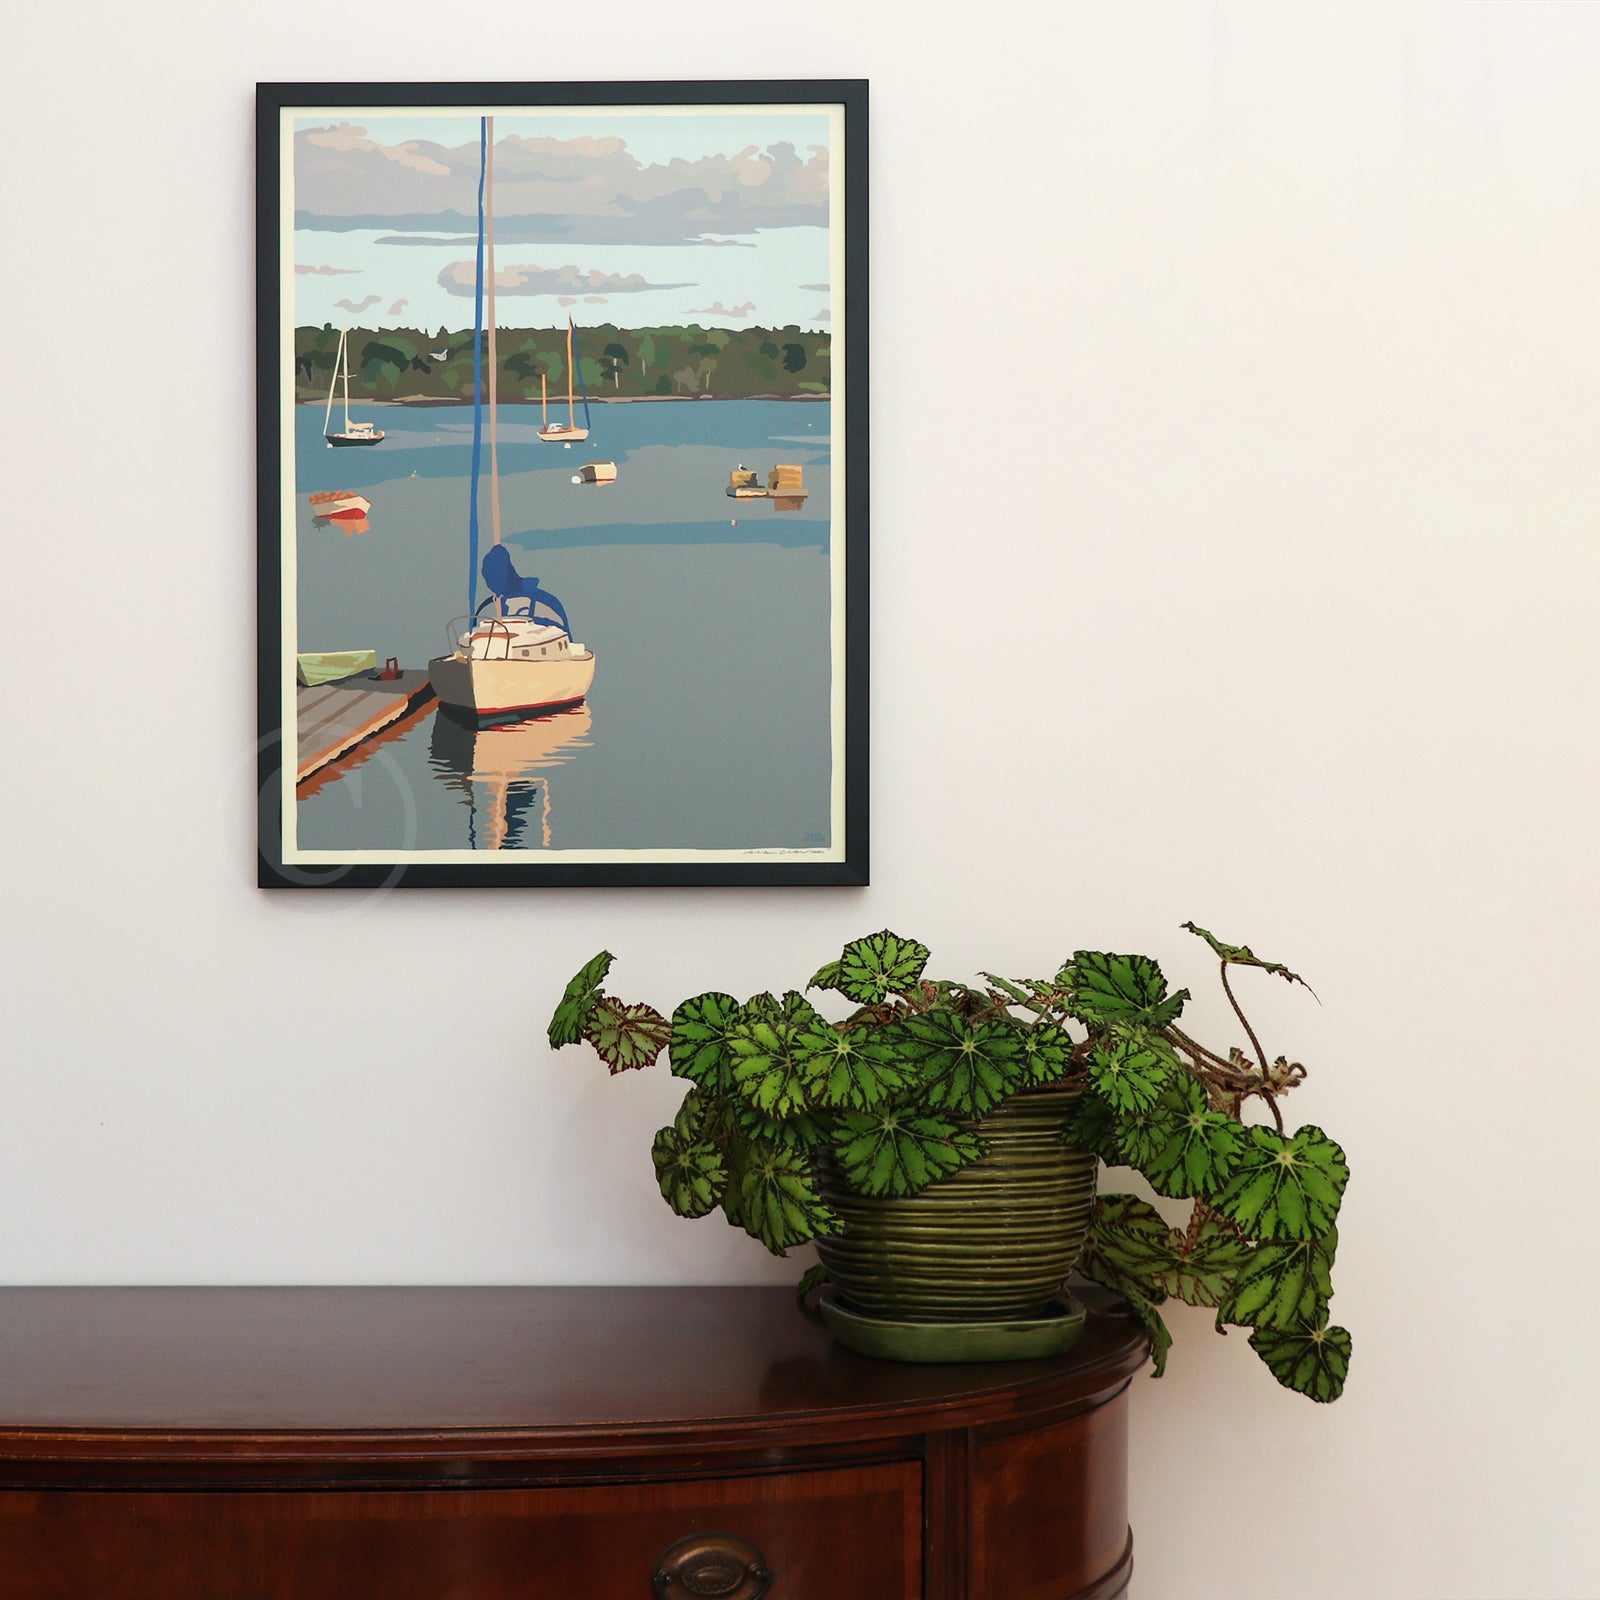 Sailboats in Round Pond Harbor Art Print 18" x 24” Framed Wall Poster By Alan Claude - Maine